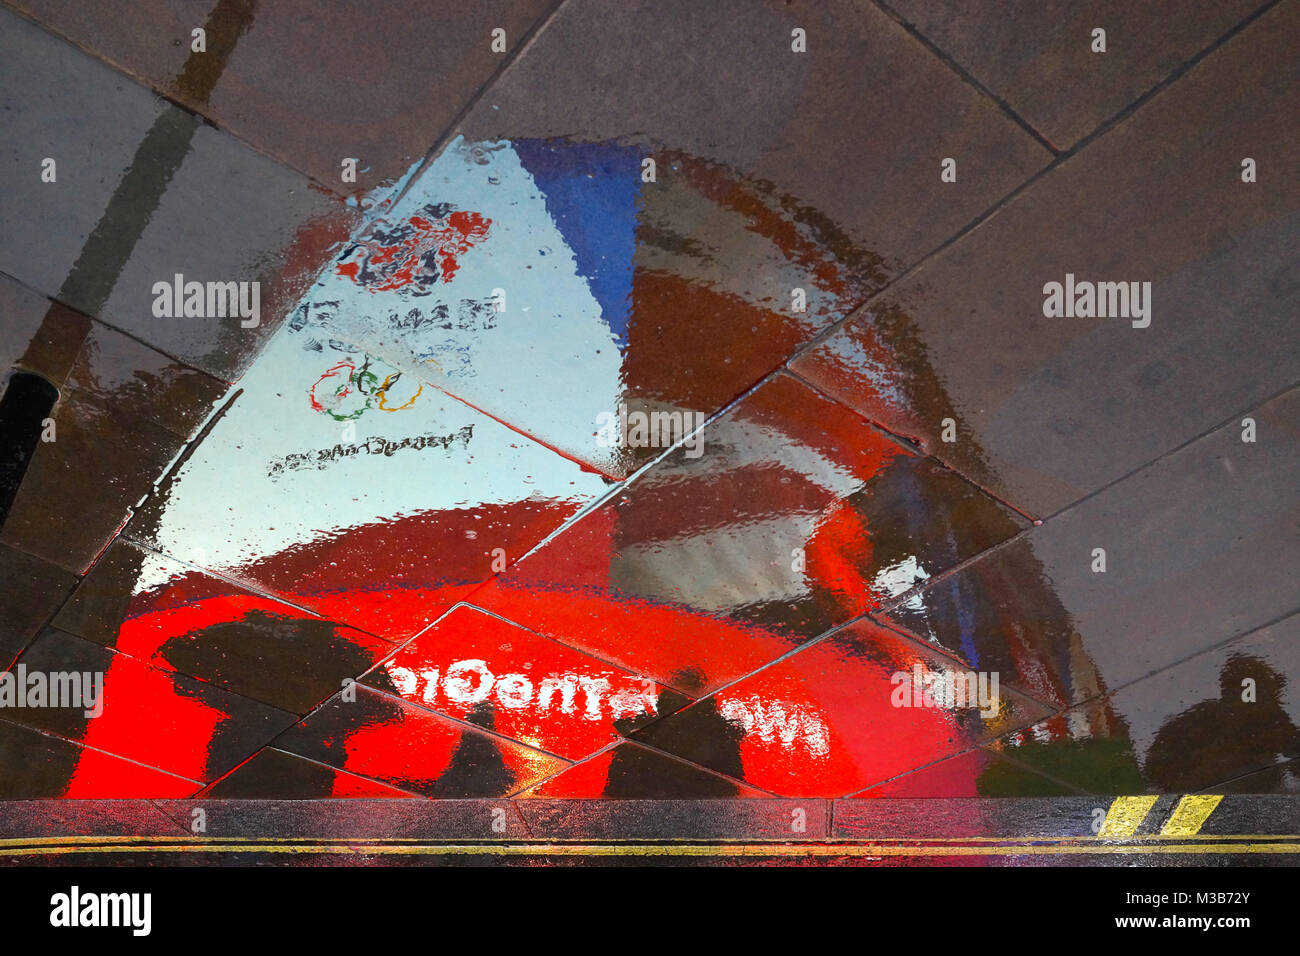 Team GB 2018 winter olympics advertisement reflected in the rain at Piccadilly Circus Stock Photo